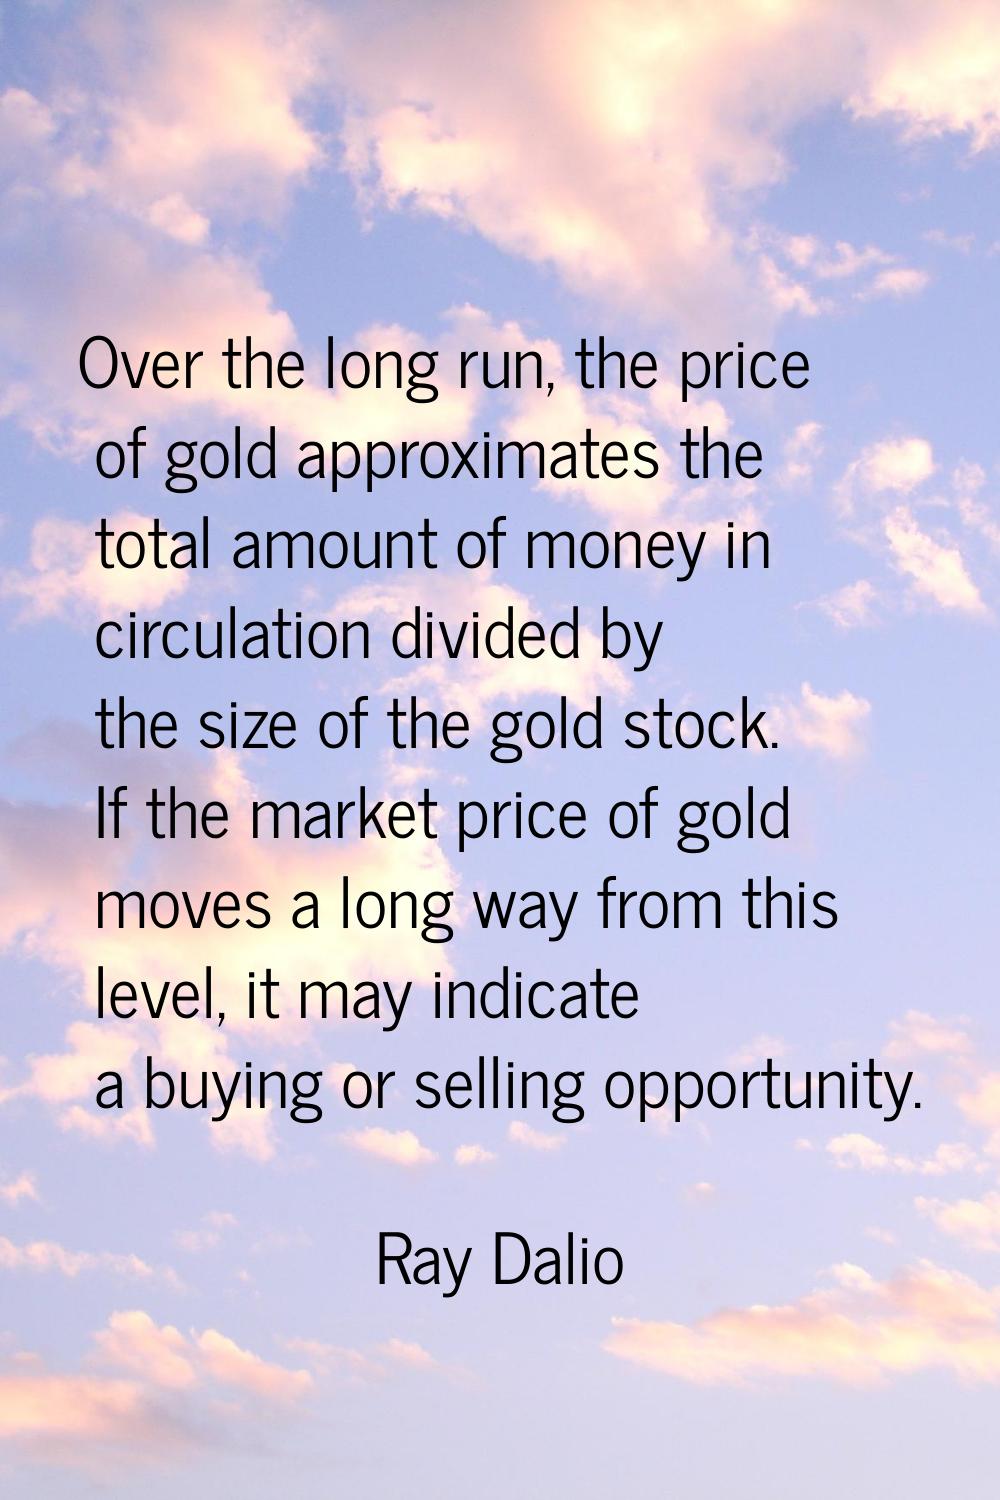 Over the long run, the price of gold approximates the total amount of money in circulation divided 